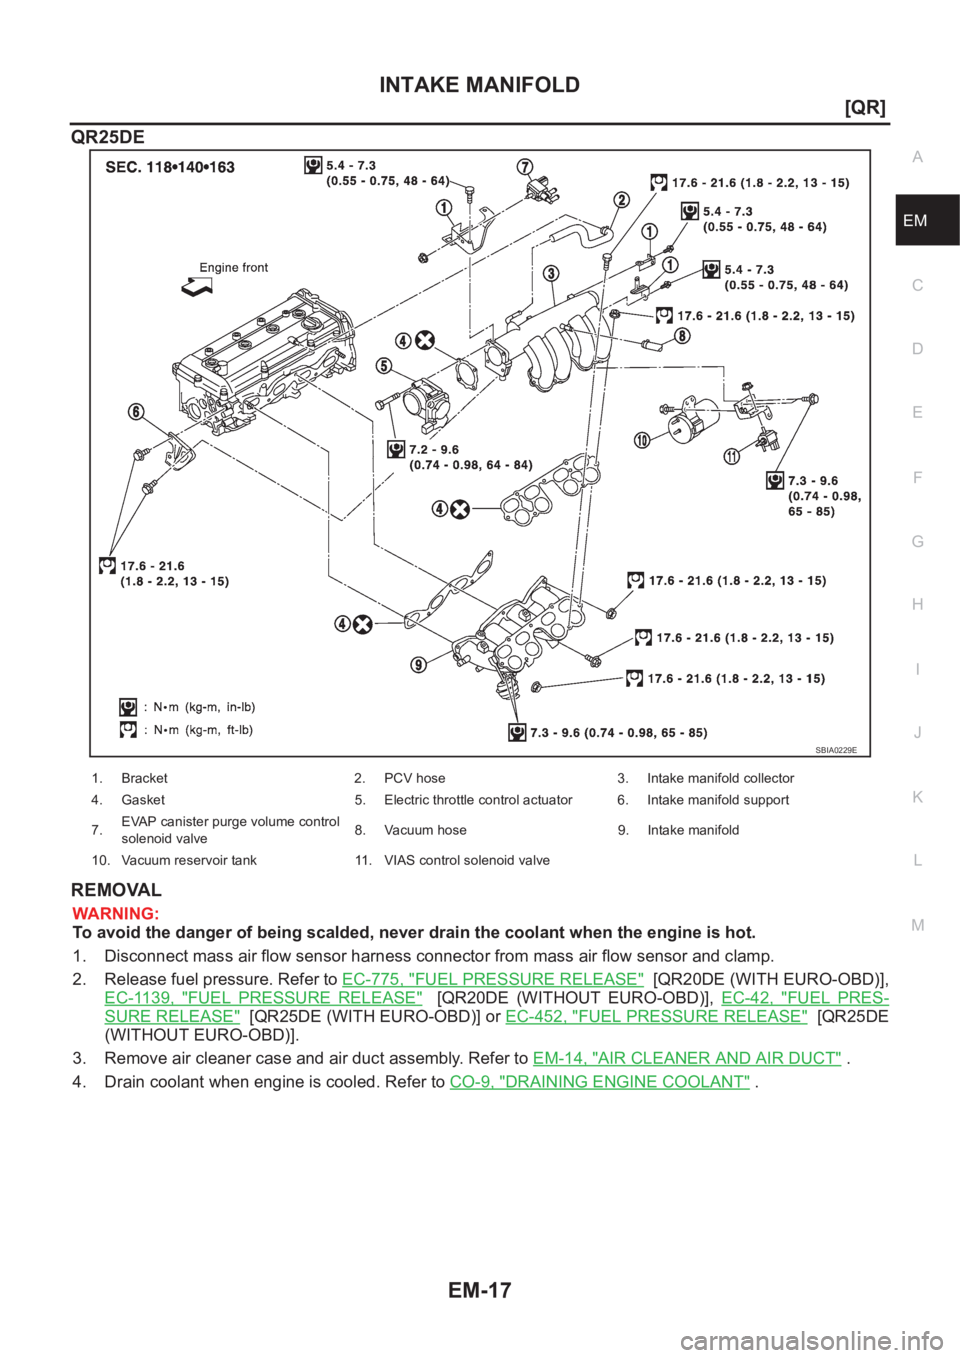 NISSAN X-TRAIL 2001  Service Repair Manual INTAKE MANIFOLD
EM-17
[QR]
C
D
E
F
G
H
I
J
K
L
MA
EM
QR25DE
REMOVAL
WARNING:
To avoid the danger of being scalded, never drain the coolant when the engine is hot.
1. Disconnect mass air flow sensor ha